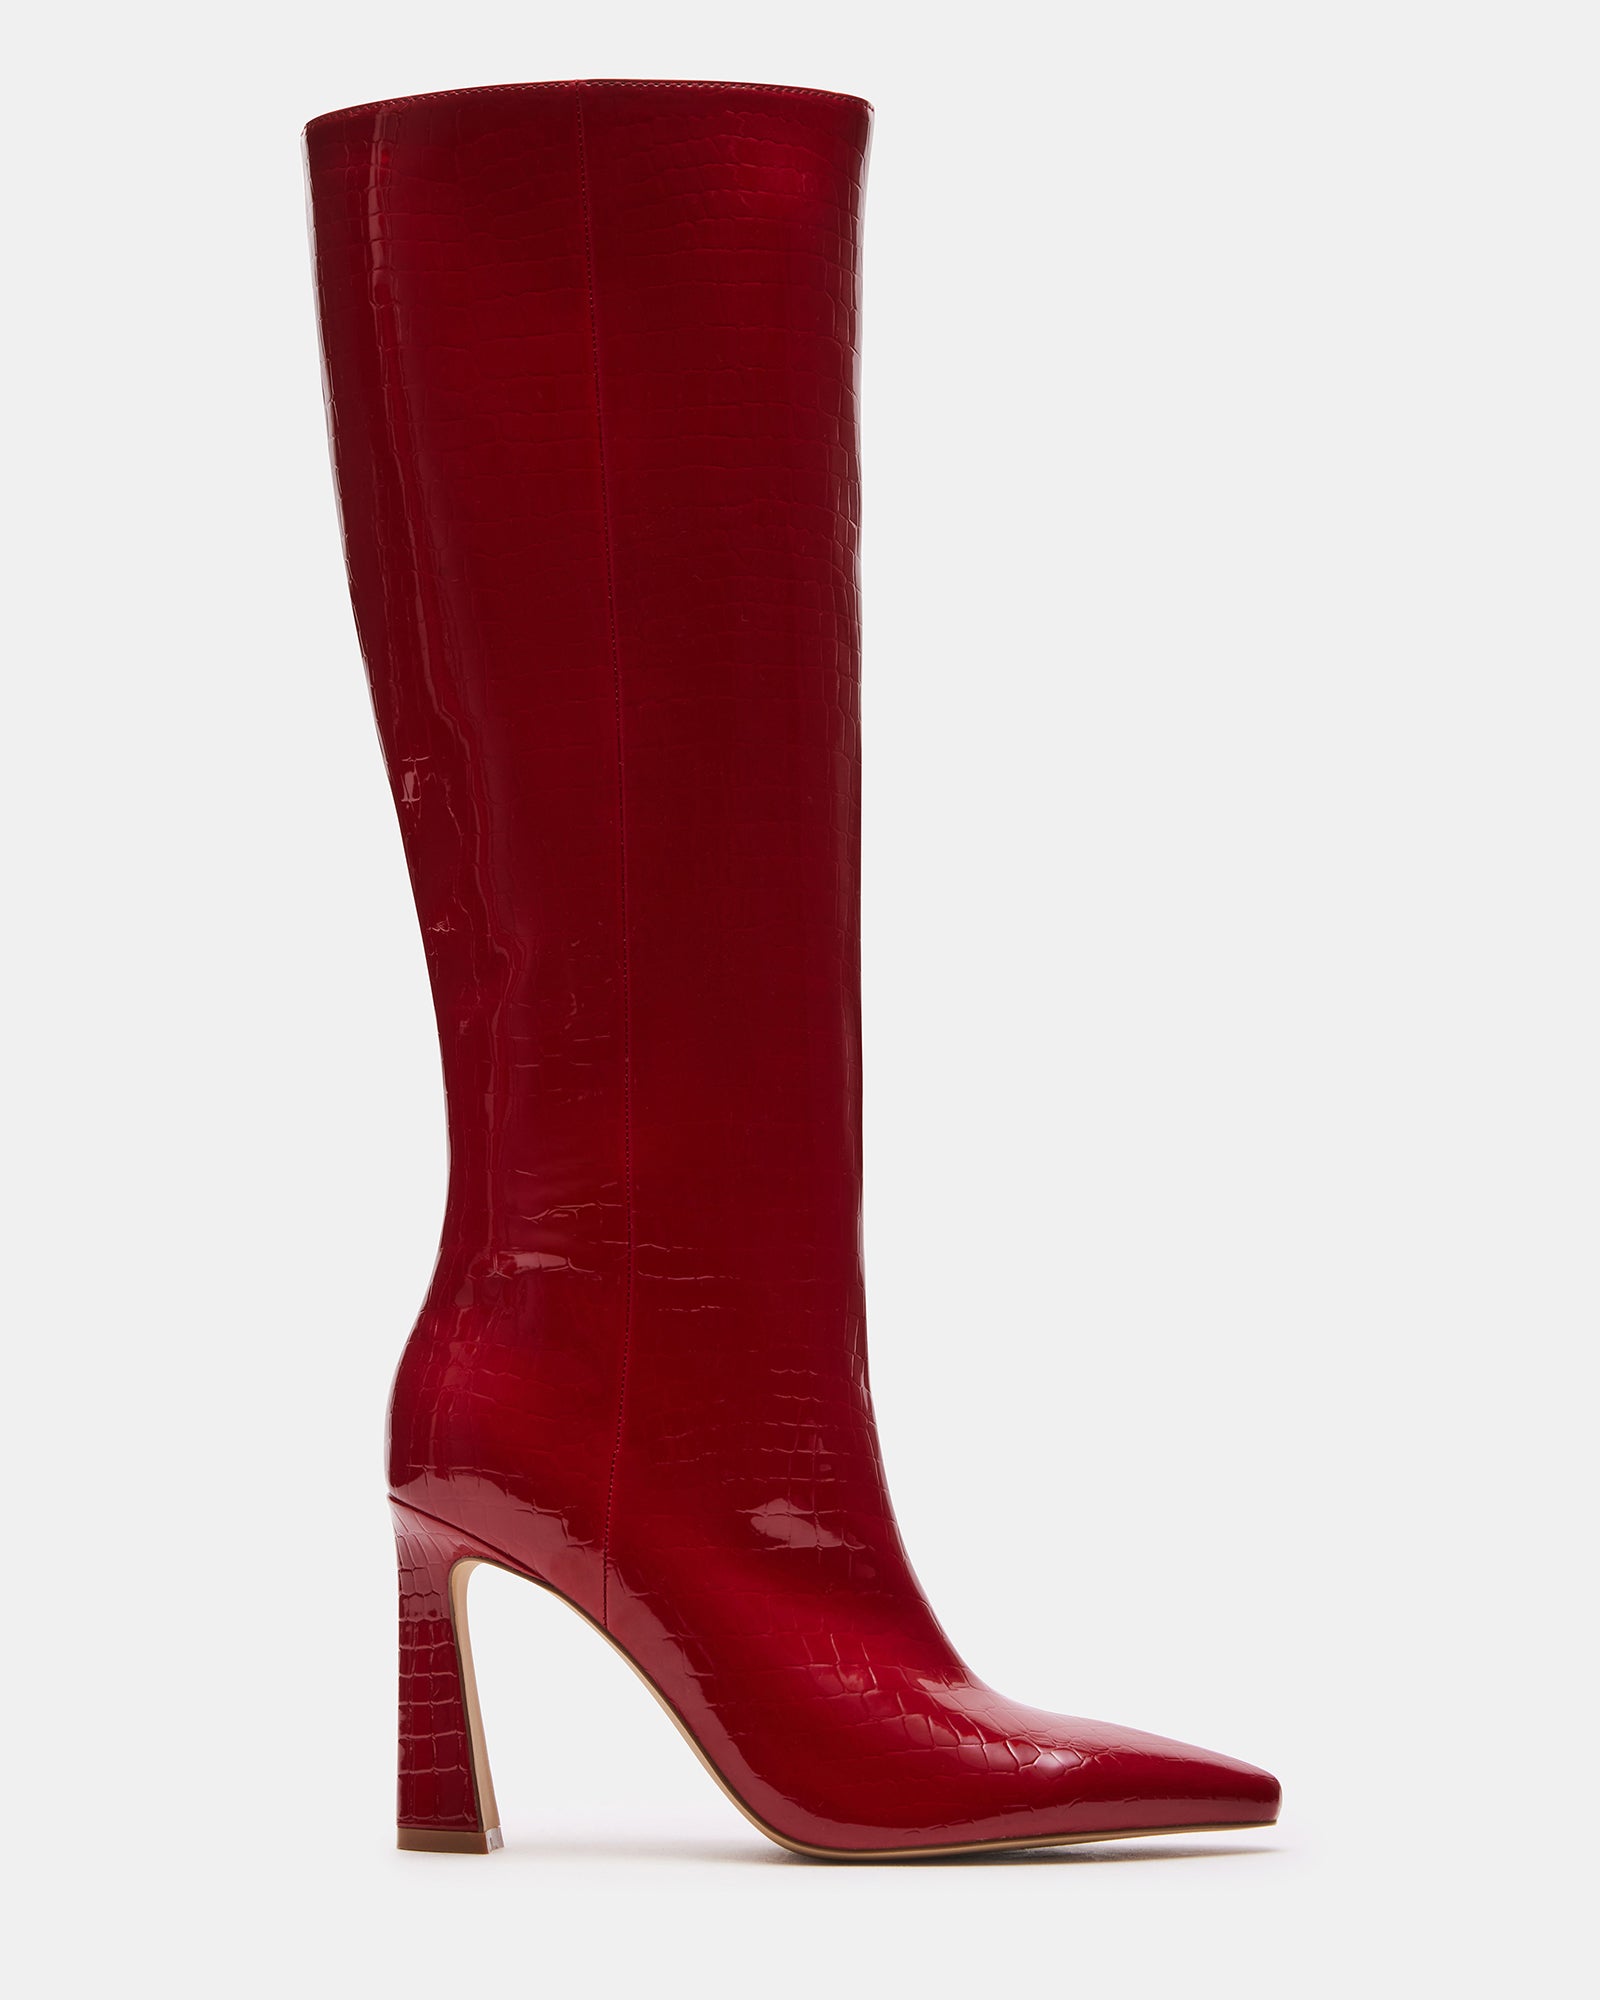 Red Patent Knee High Boot, Shoes